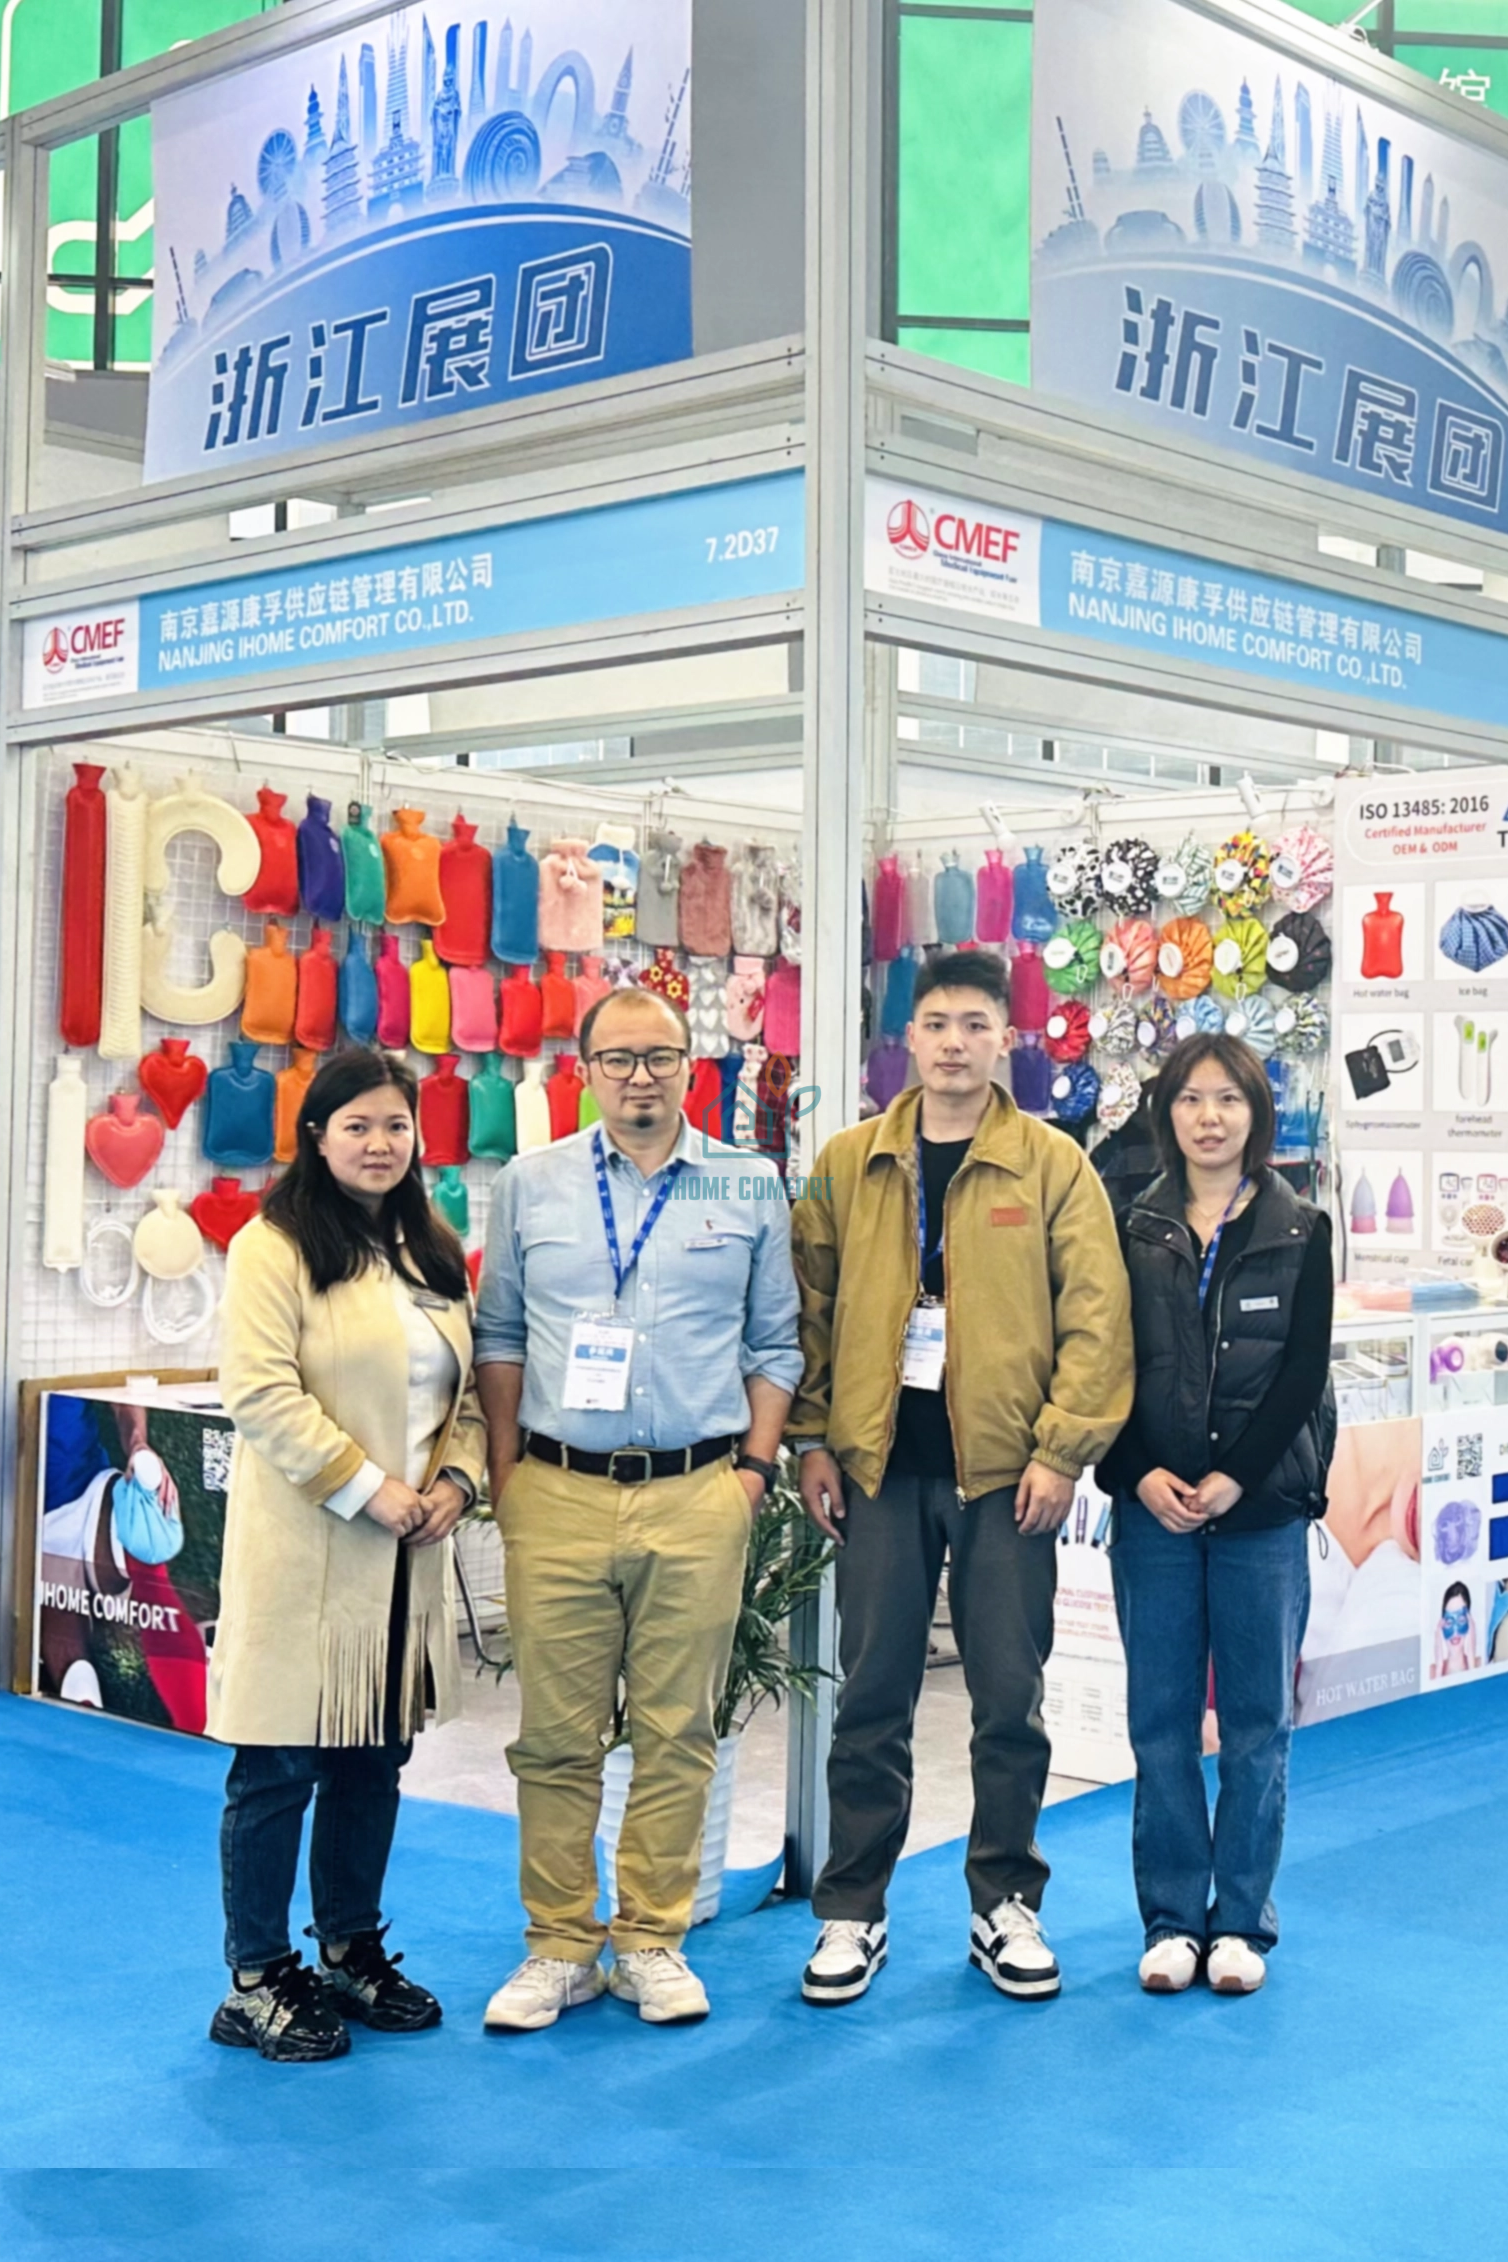 The 89th China International Medical Device (Spring) Expo of Shanghai CMEF in 2024